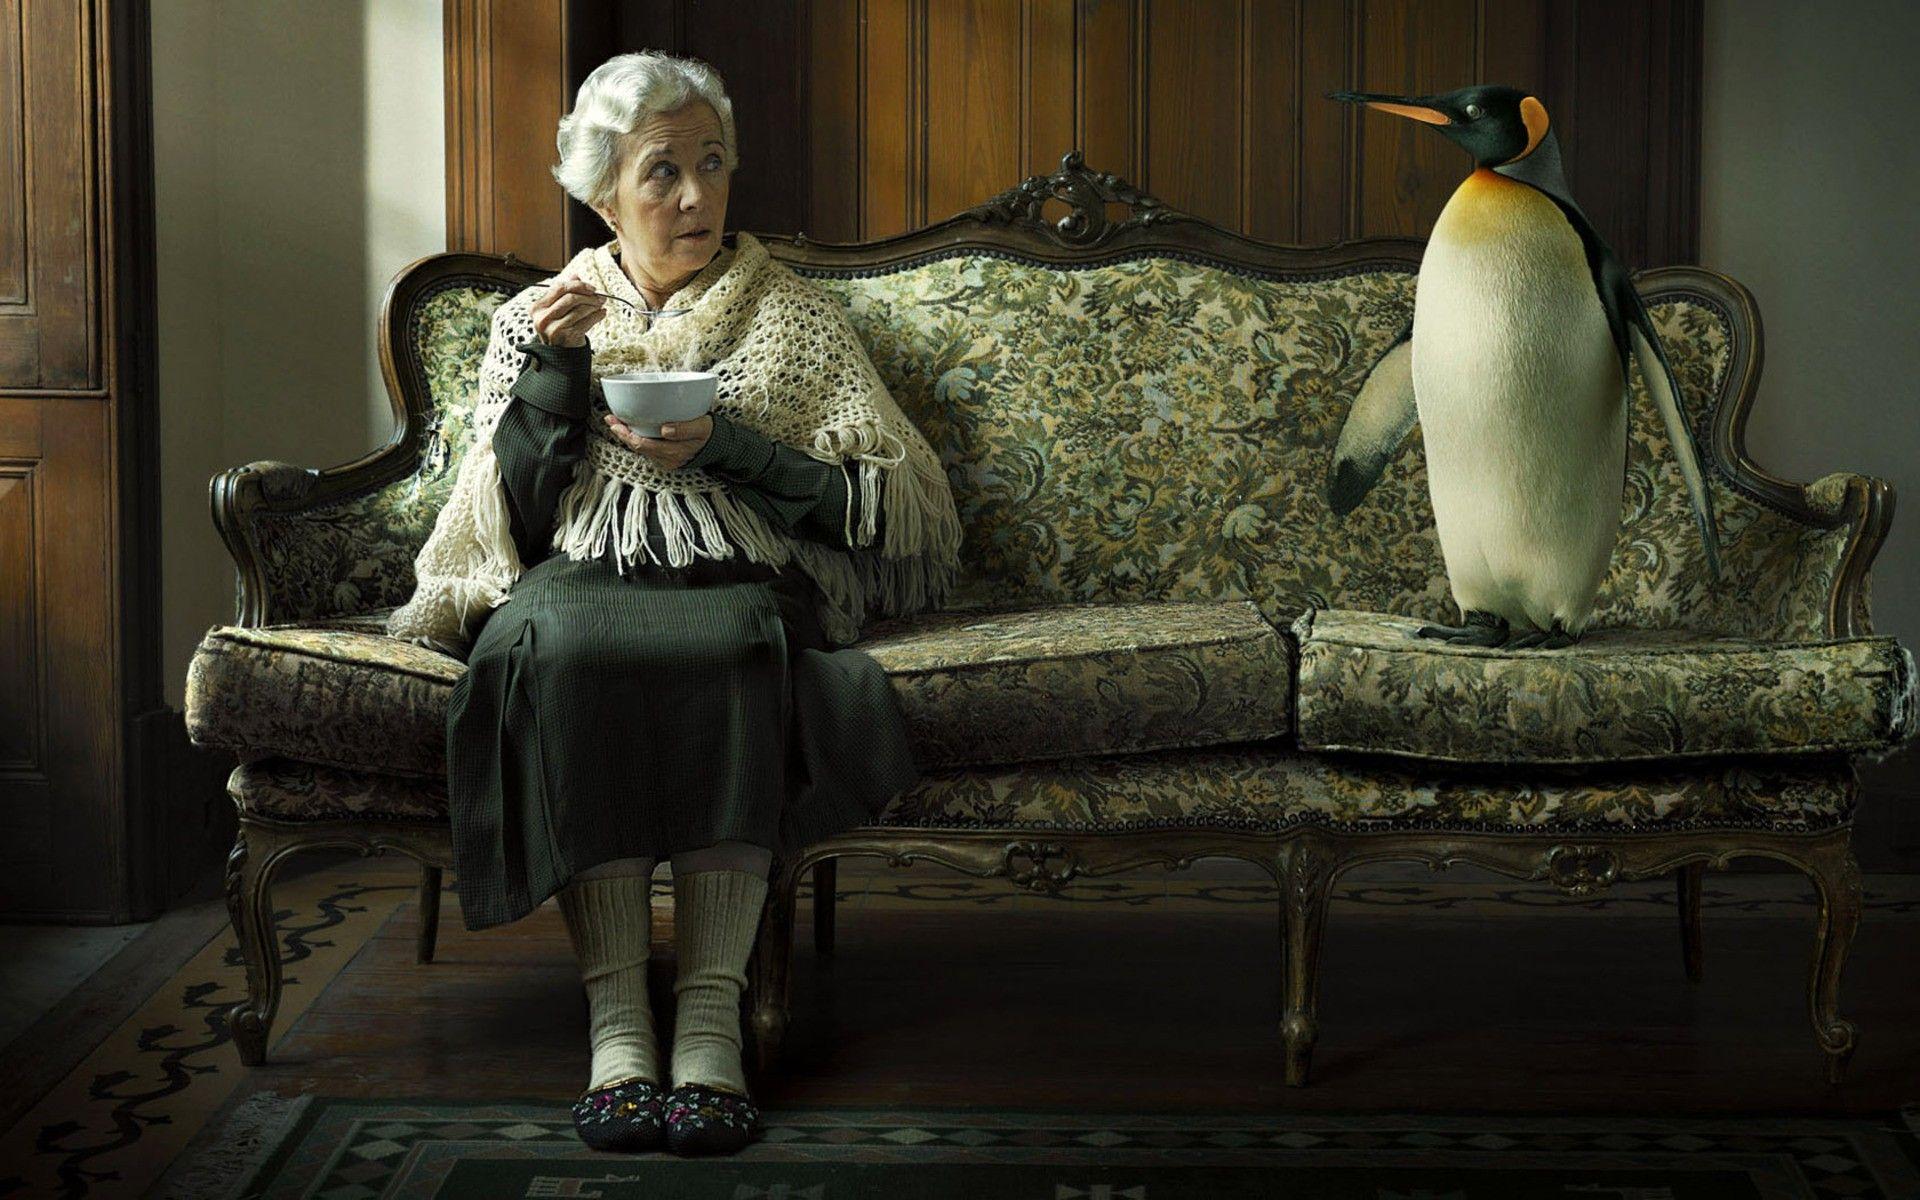 sitting, #old people, #penguins, #couch, #carpets, #birds, #soup